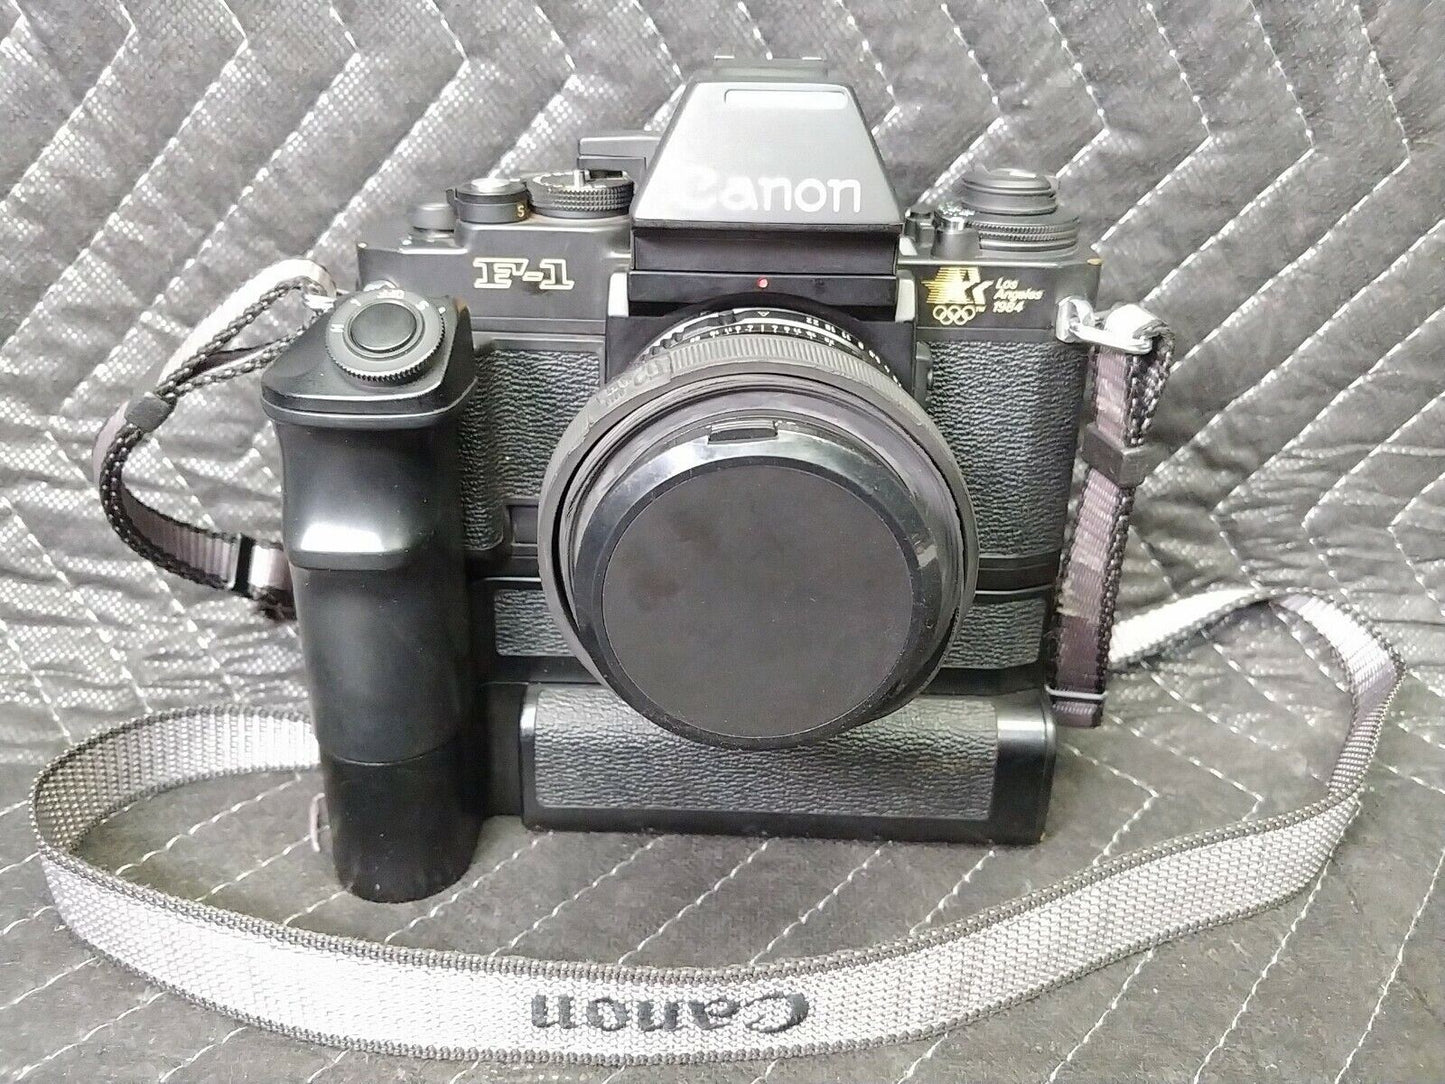 Canon New F-1 AE 1984 Los Angeles Olympic model from Japan W/ AE Motor Drive FN